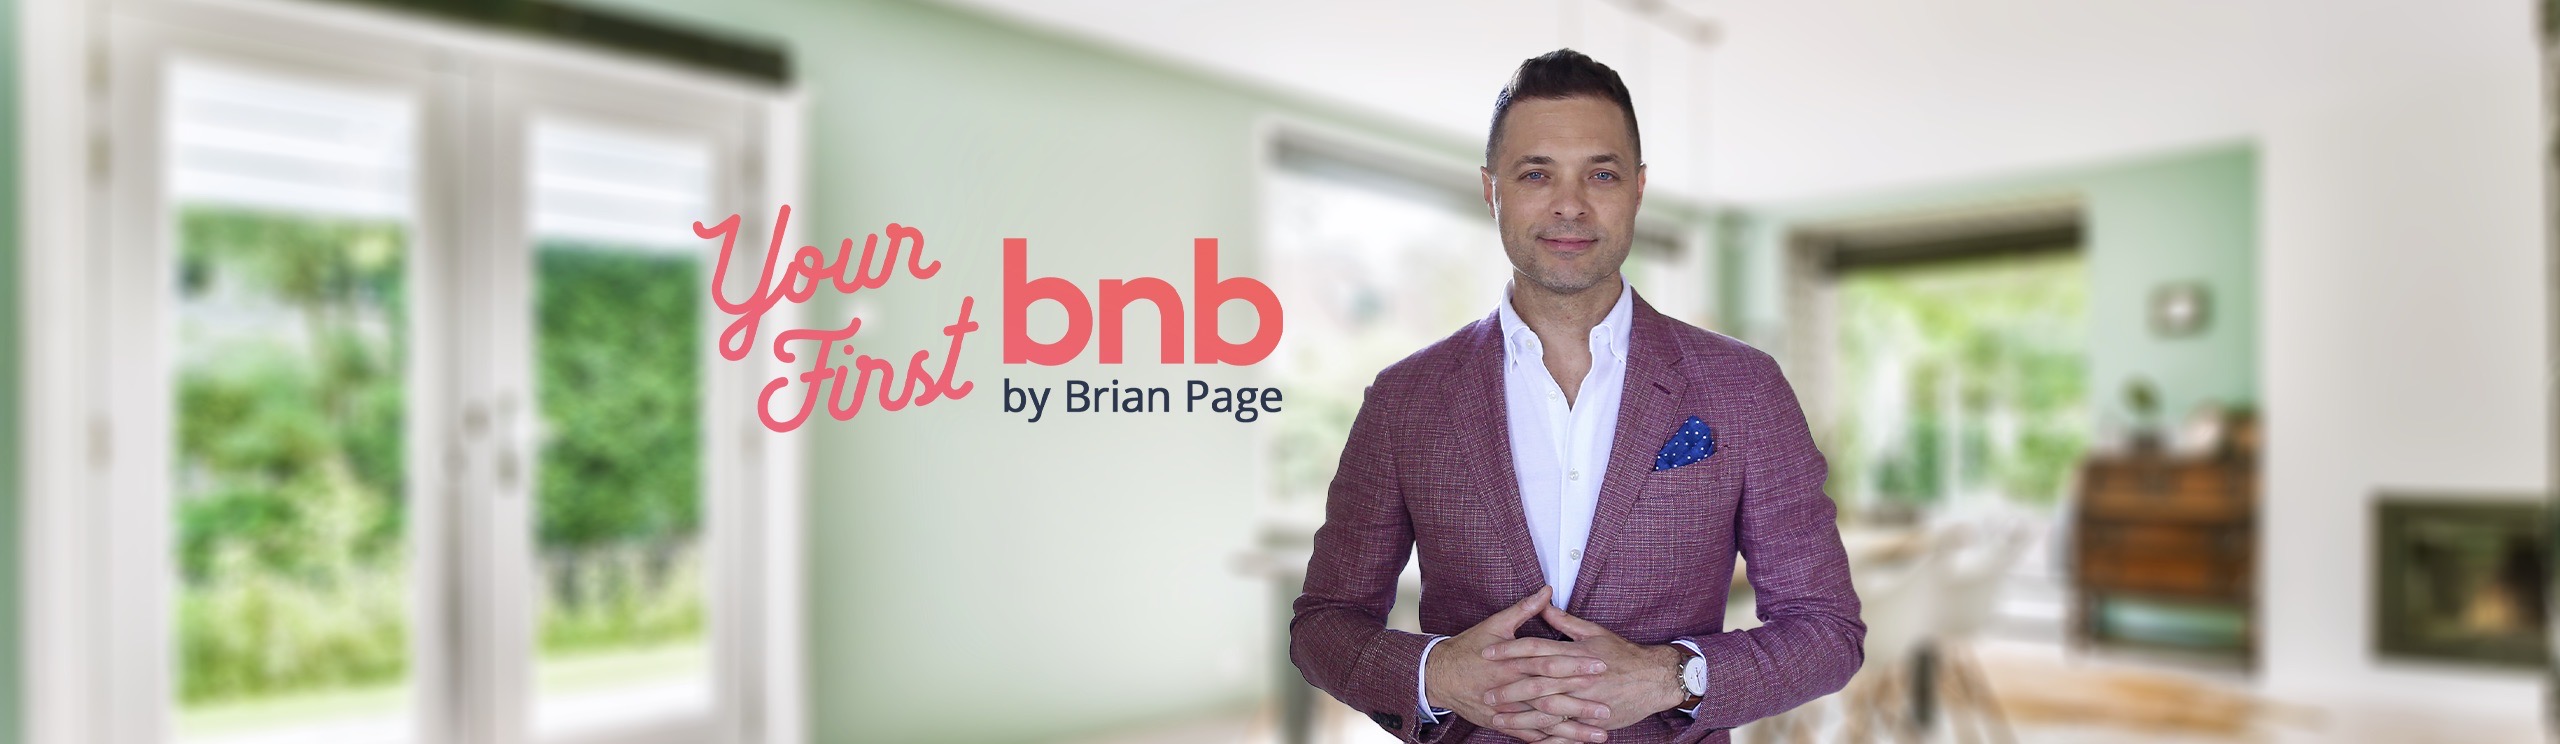 Announcing: “Your First BNB” by Brian Page